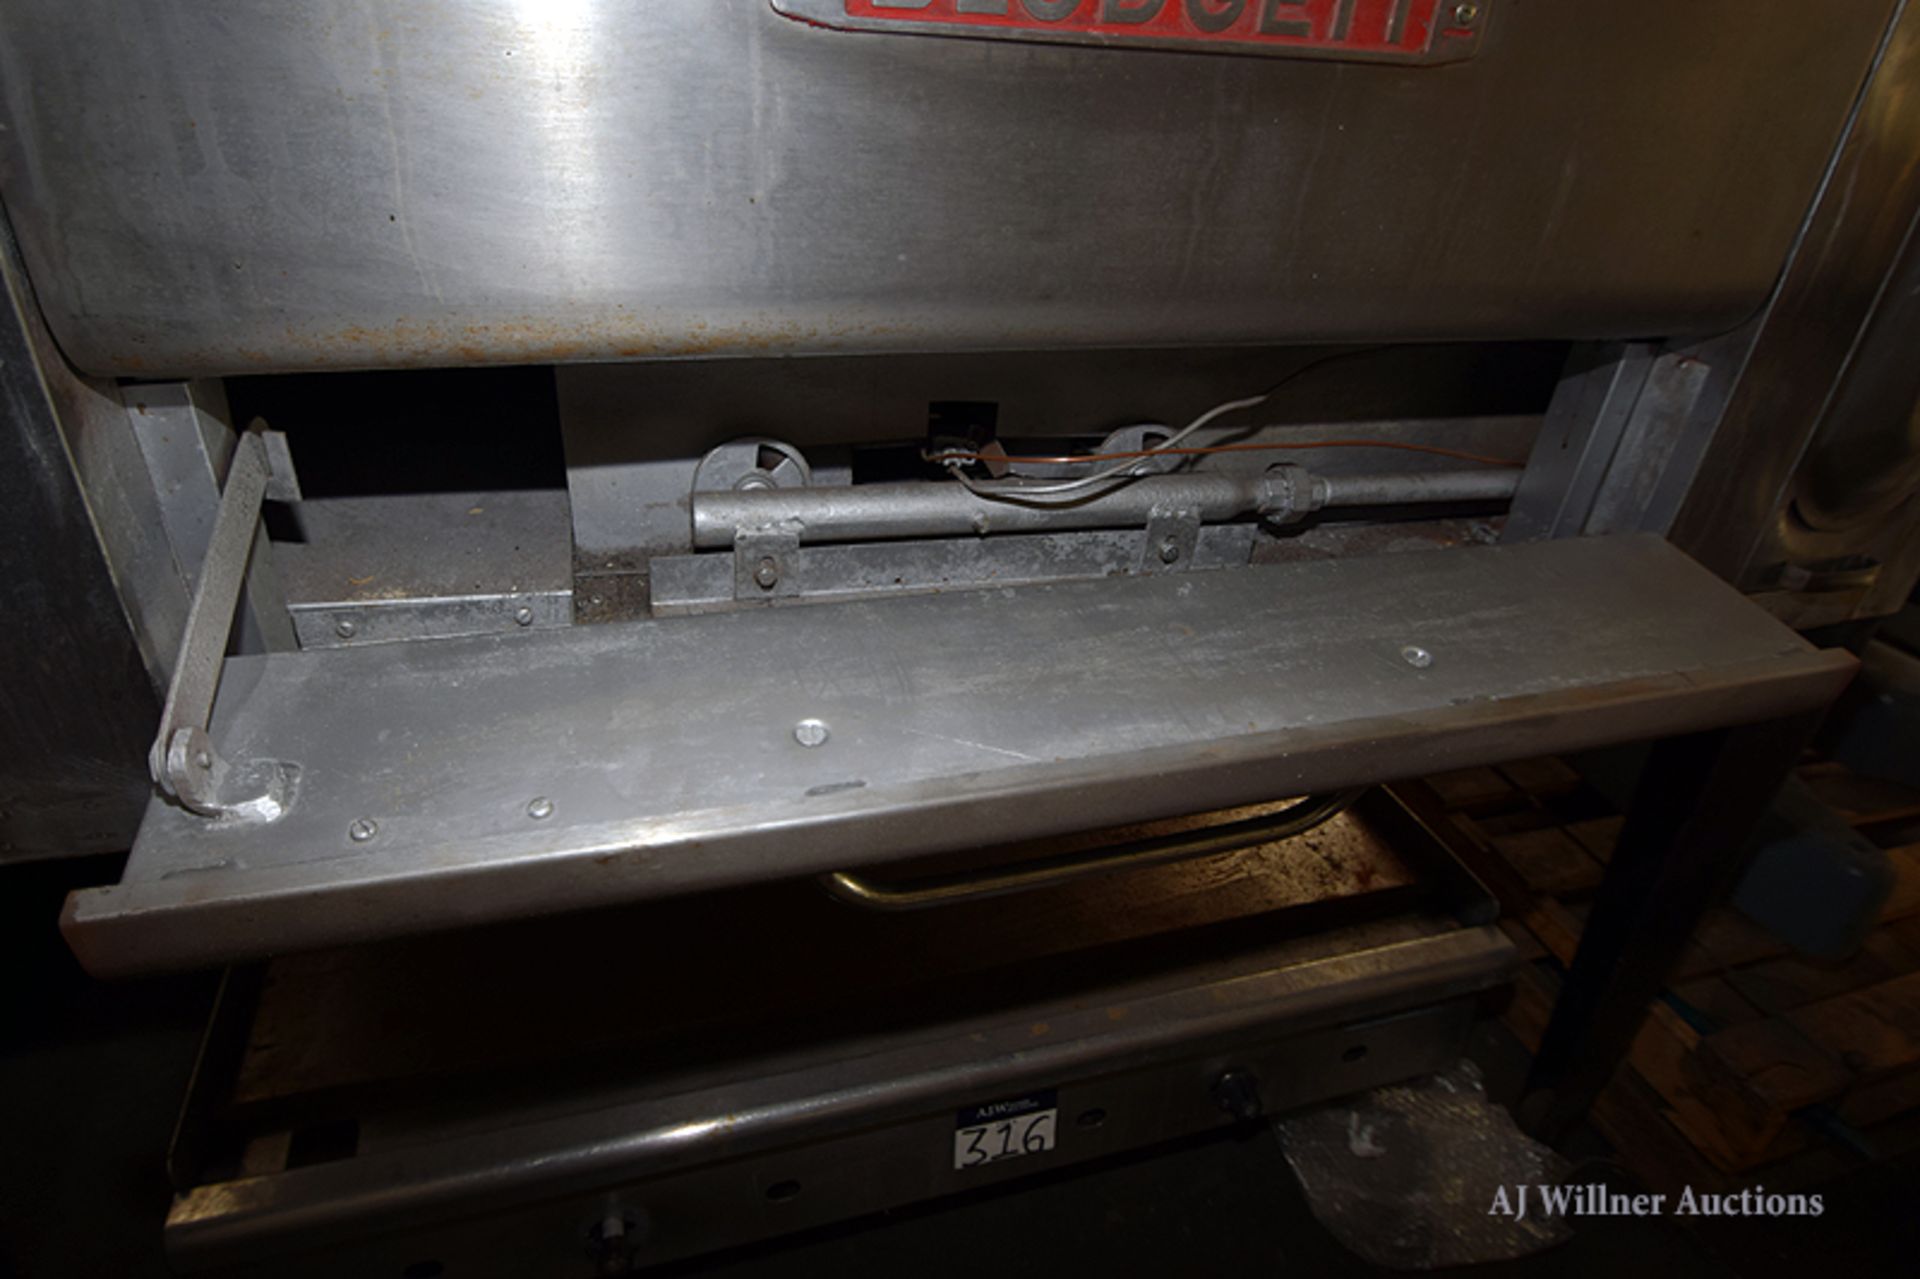 Blodgett Pizza Oven - Image 2 of 3